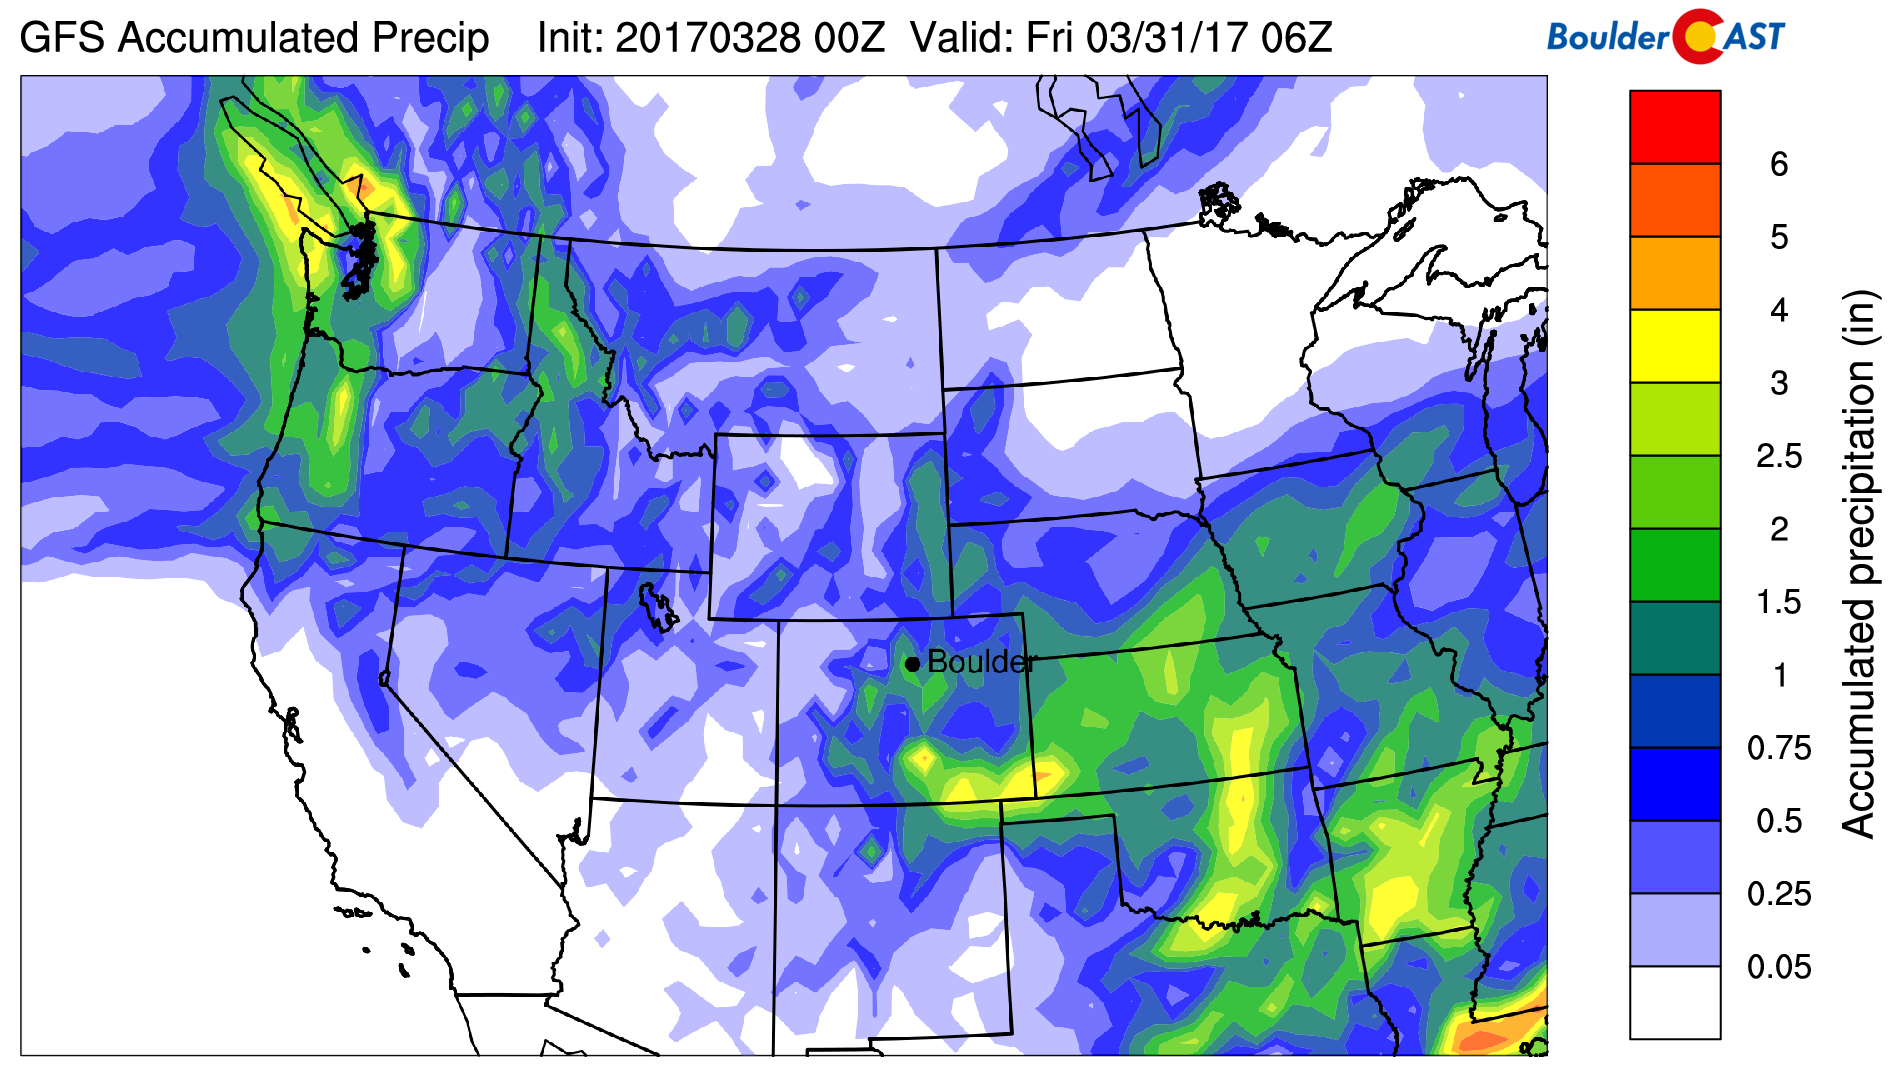 GFS total accumulated precipitation forecast for the event. Beneficial precipitation is expected for almost all of eastern Colorado